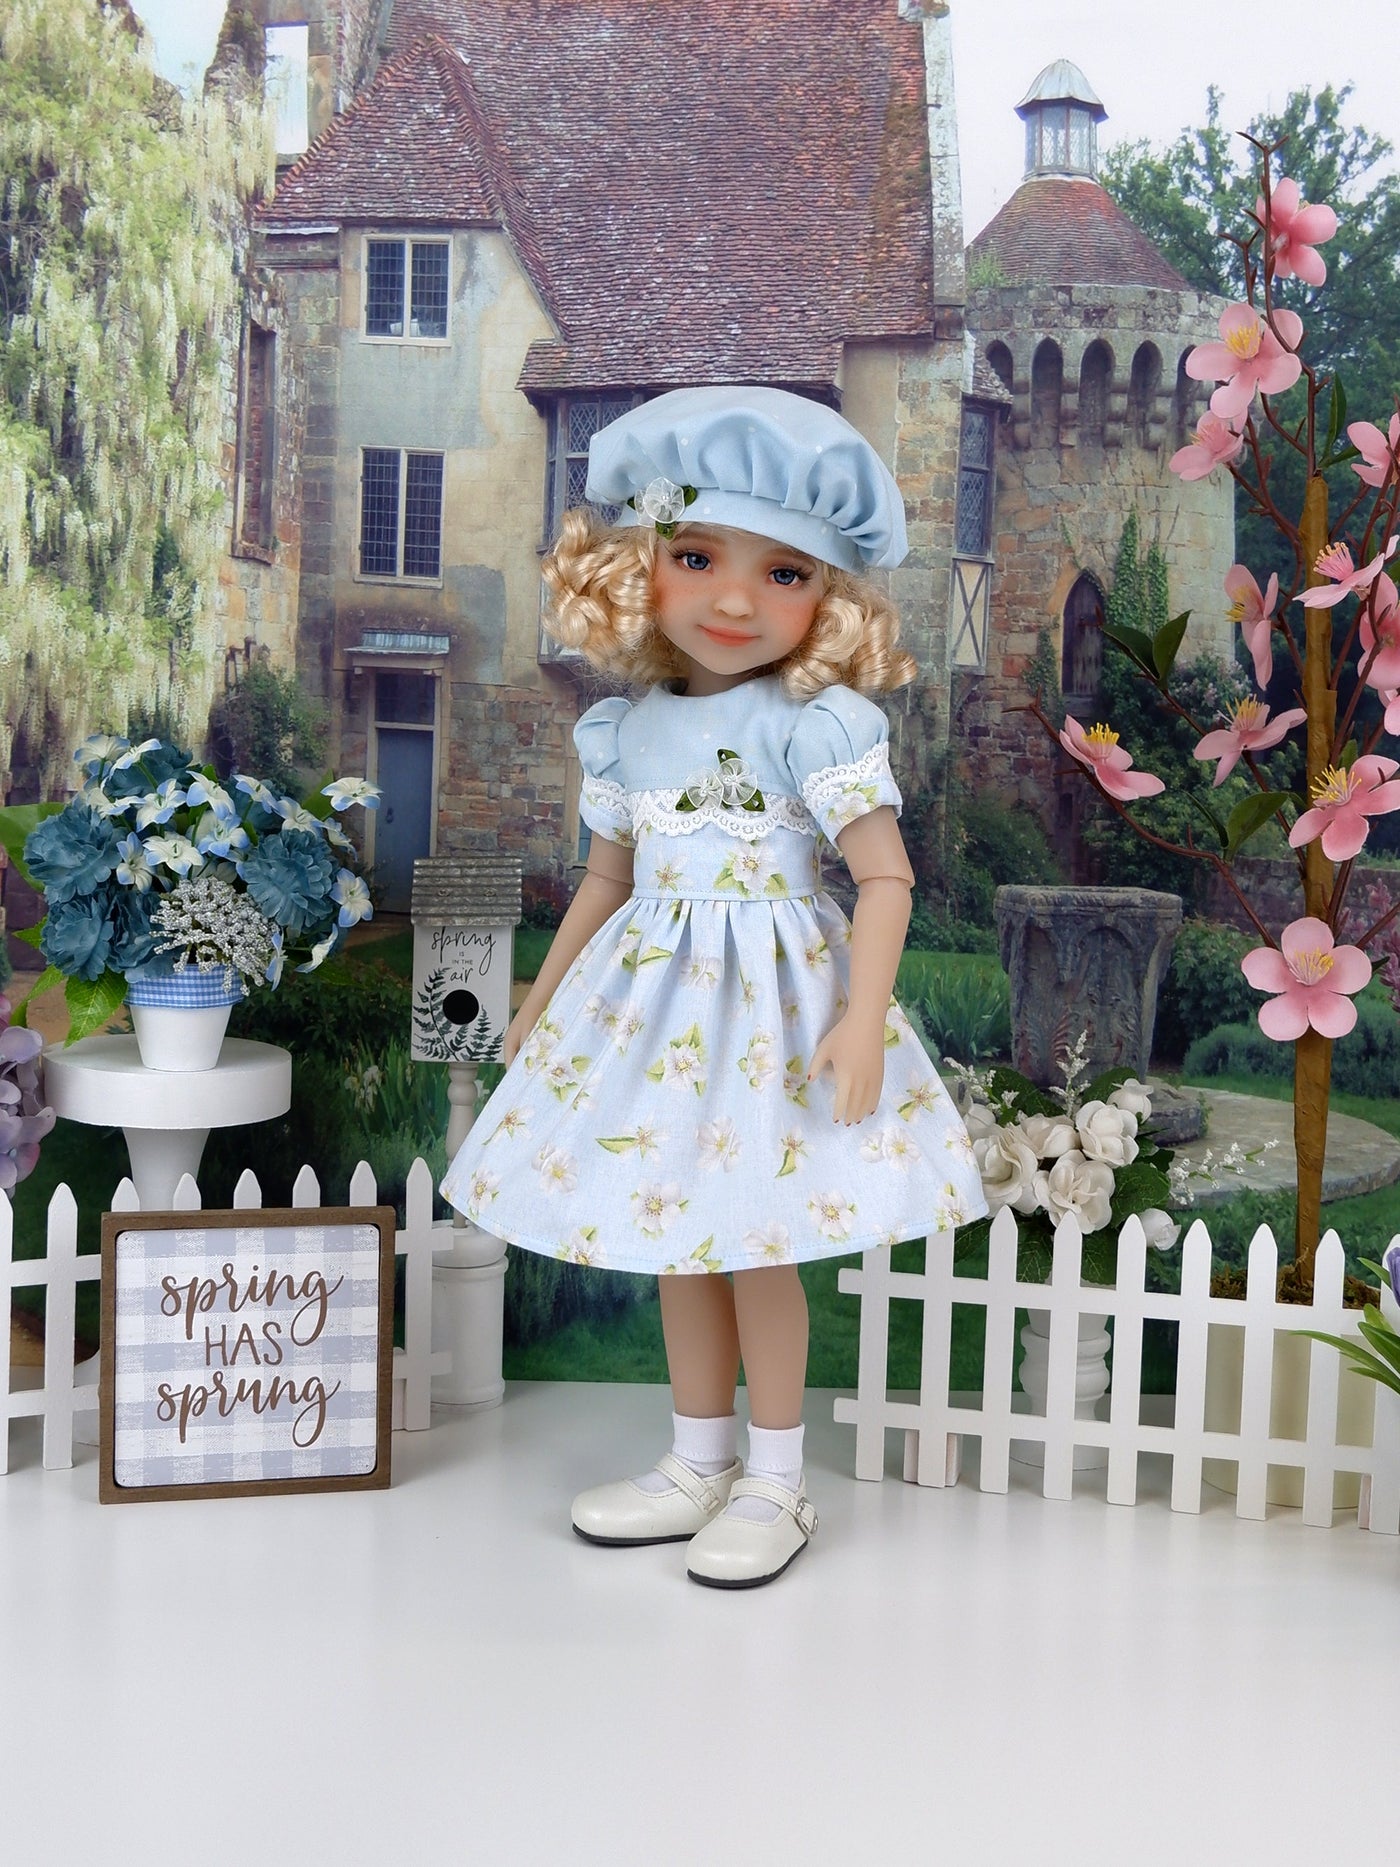 Spring Windflower - dress and shoes for Ruby Red Fashion Friends doll